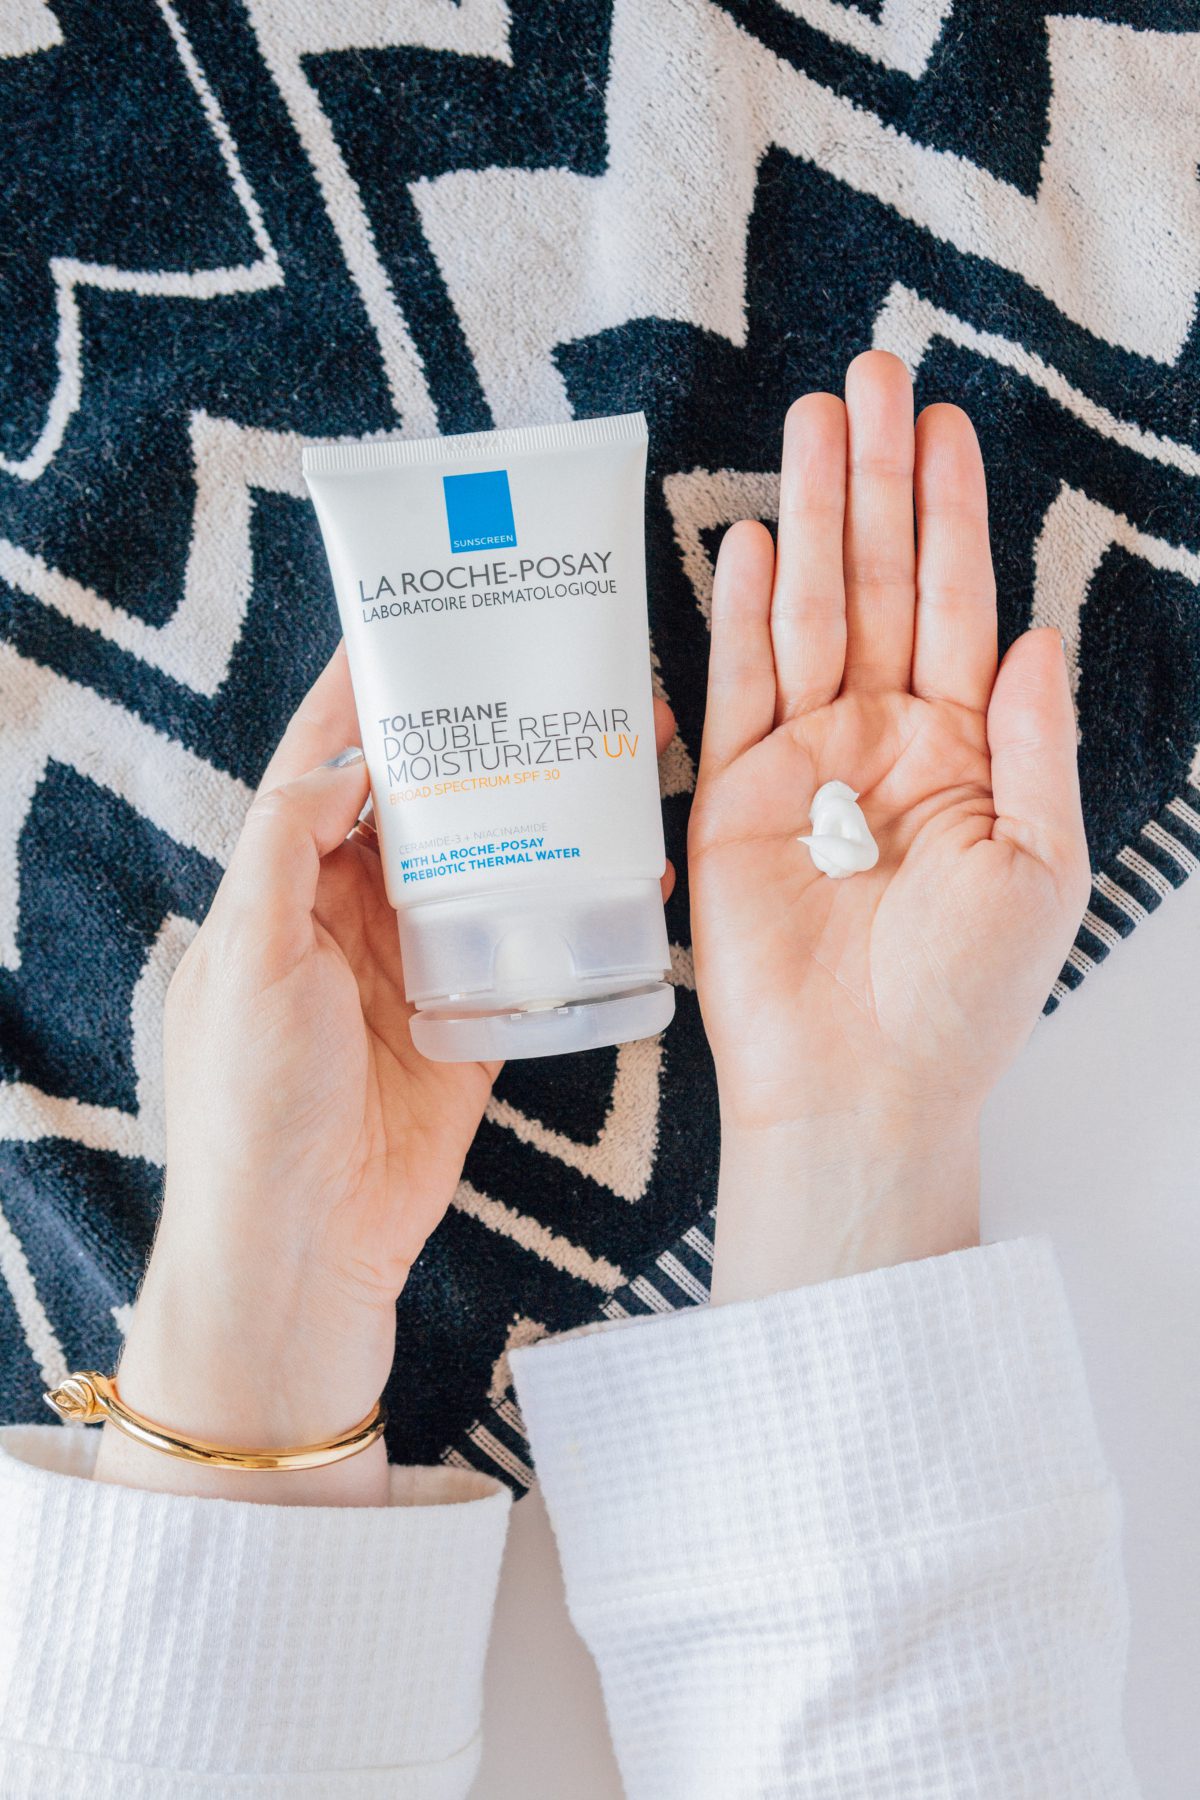 La Roche Posay Toleriane Double Repair Moisturizer | 7 Sunscreens For People Who Hate Wearing Sunscreen